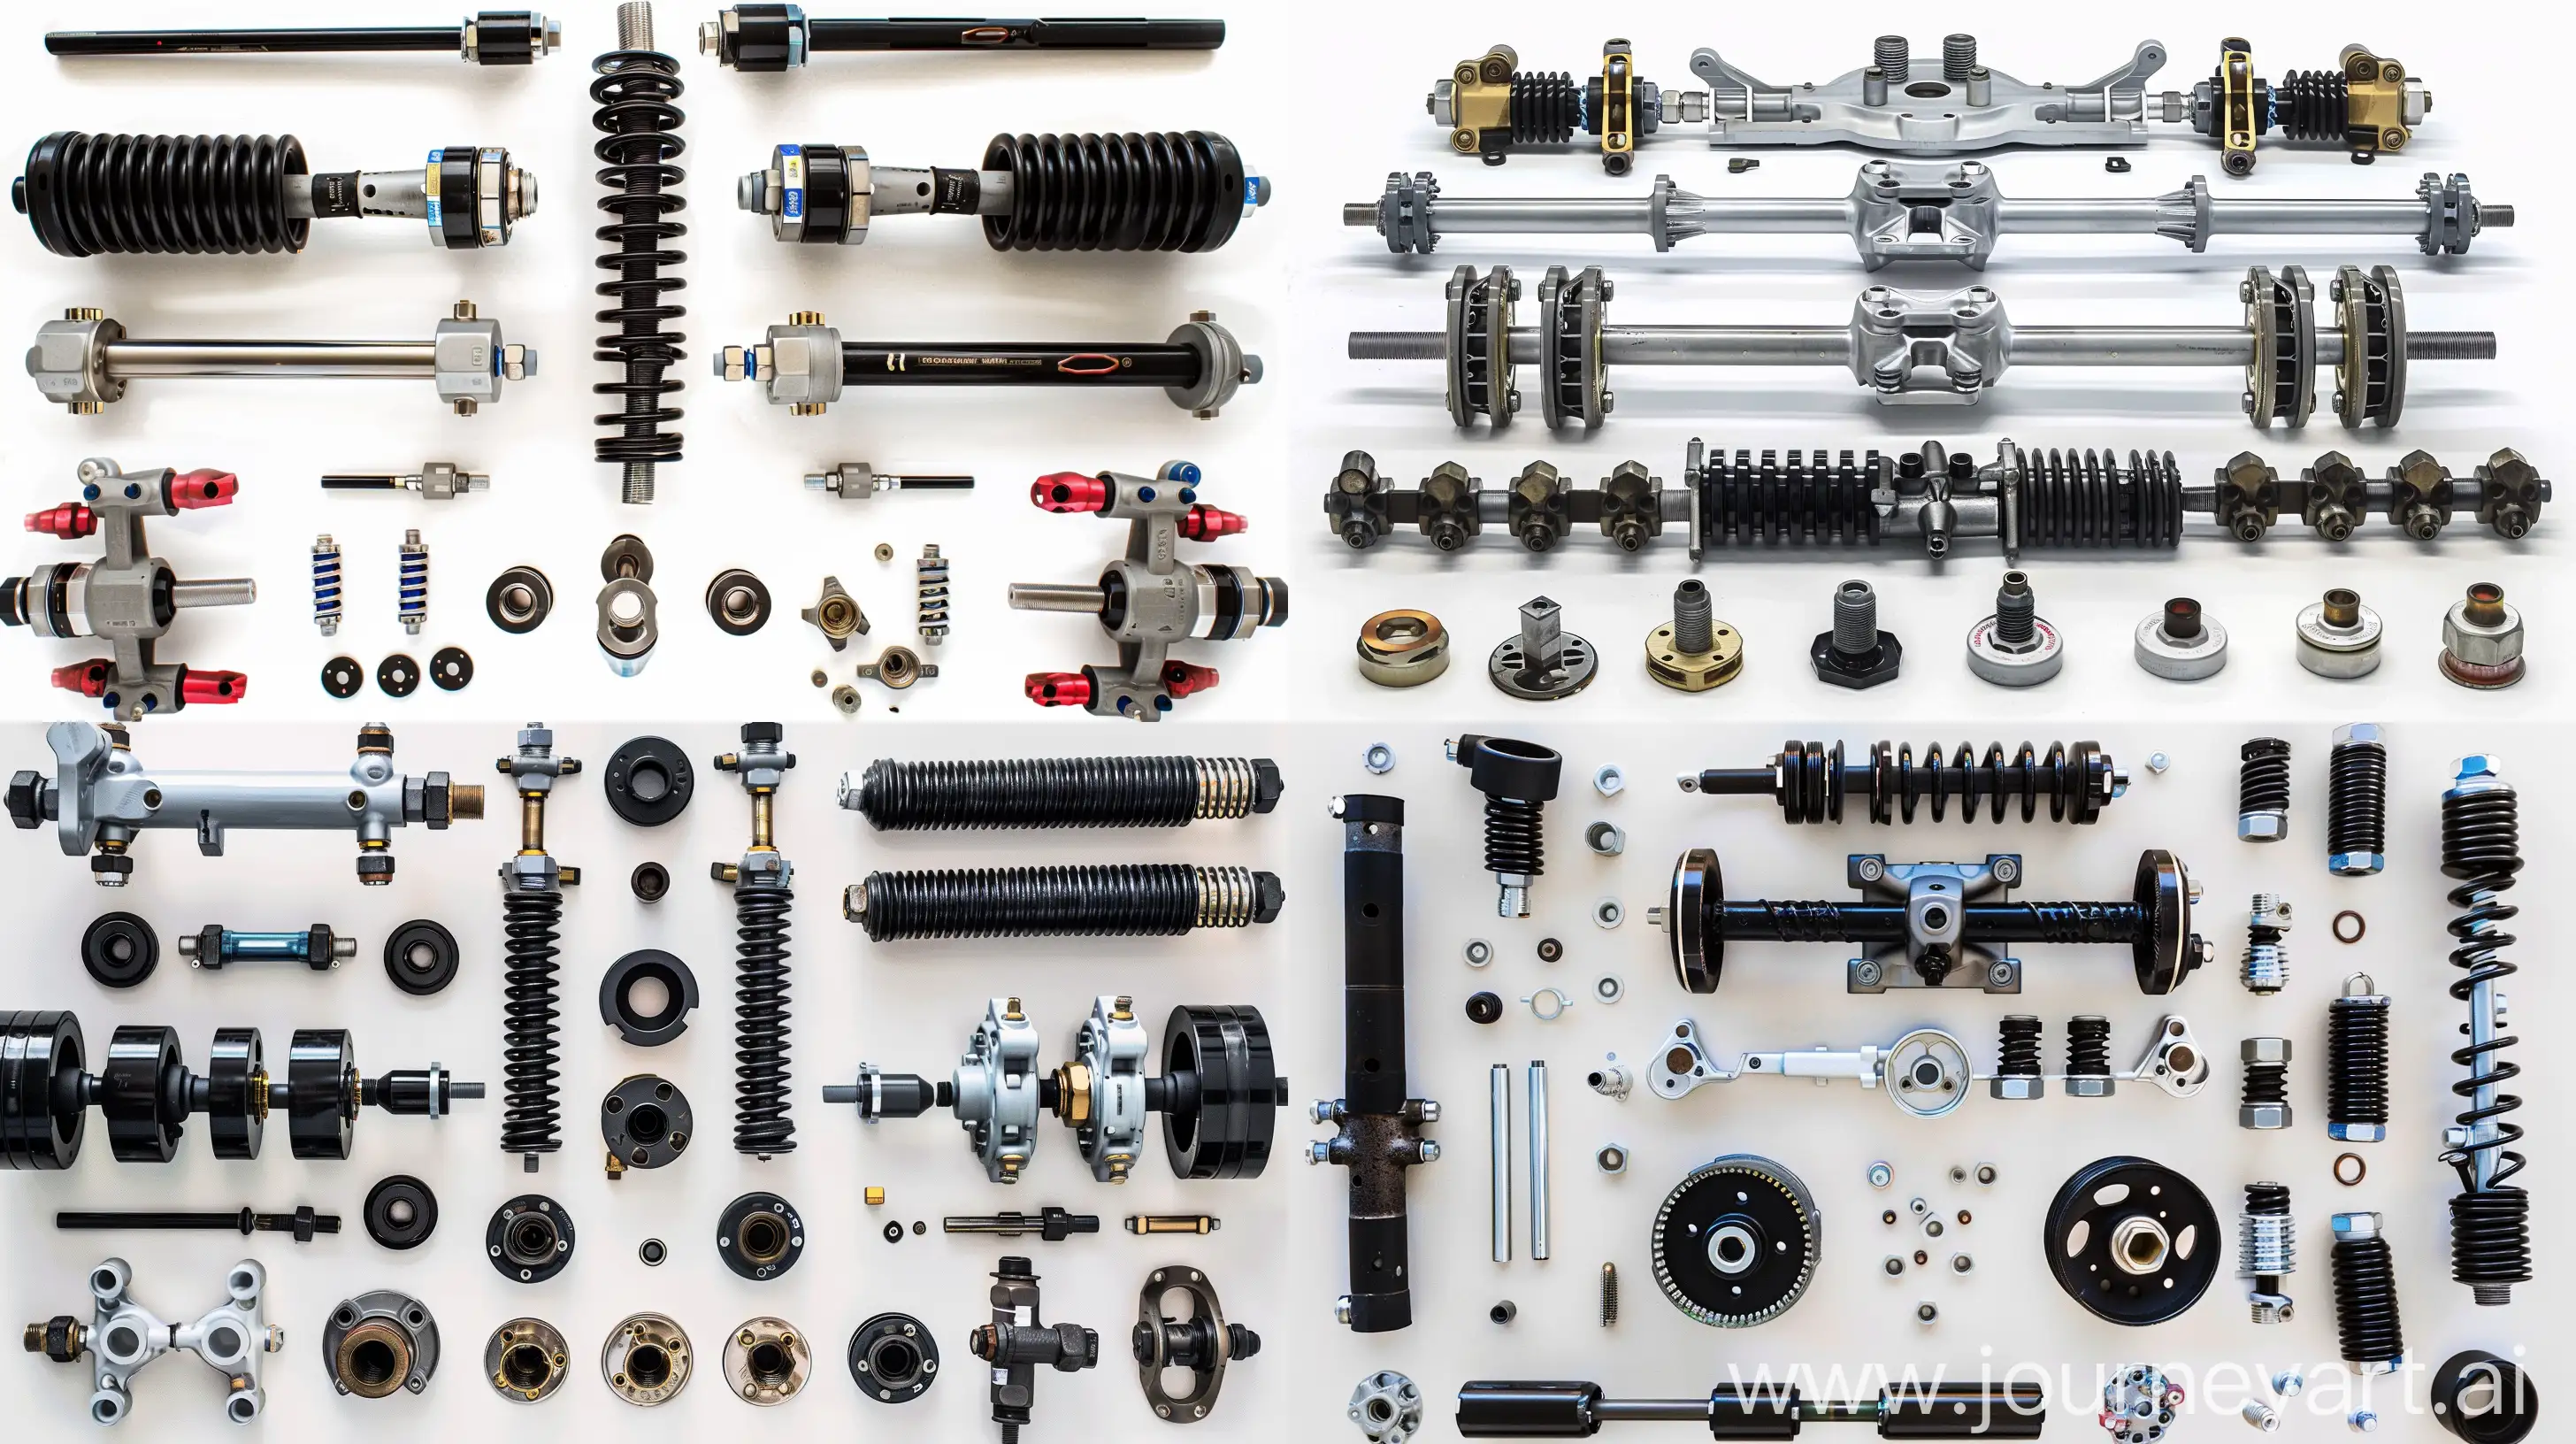 A collection of car suspension components arranged neatly together on a white background. The components should be clean and well-lit, and they should be arranged in a way that is visually appealing and easy to understand. The prompt should also specify that the components should be realistic and accurate in their proportions and details.  --ar 16:9

